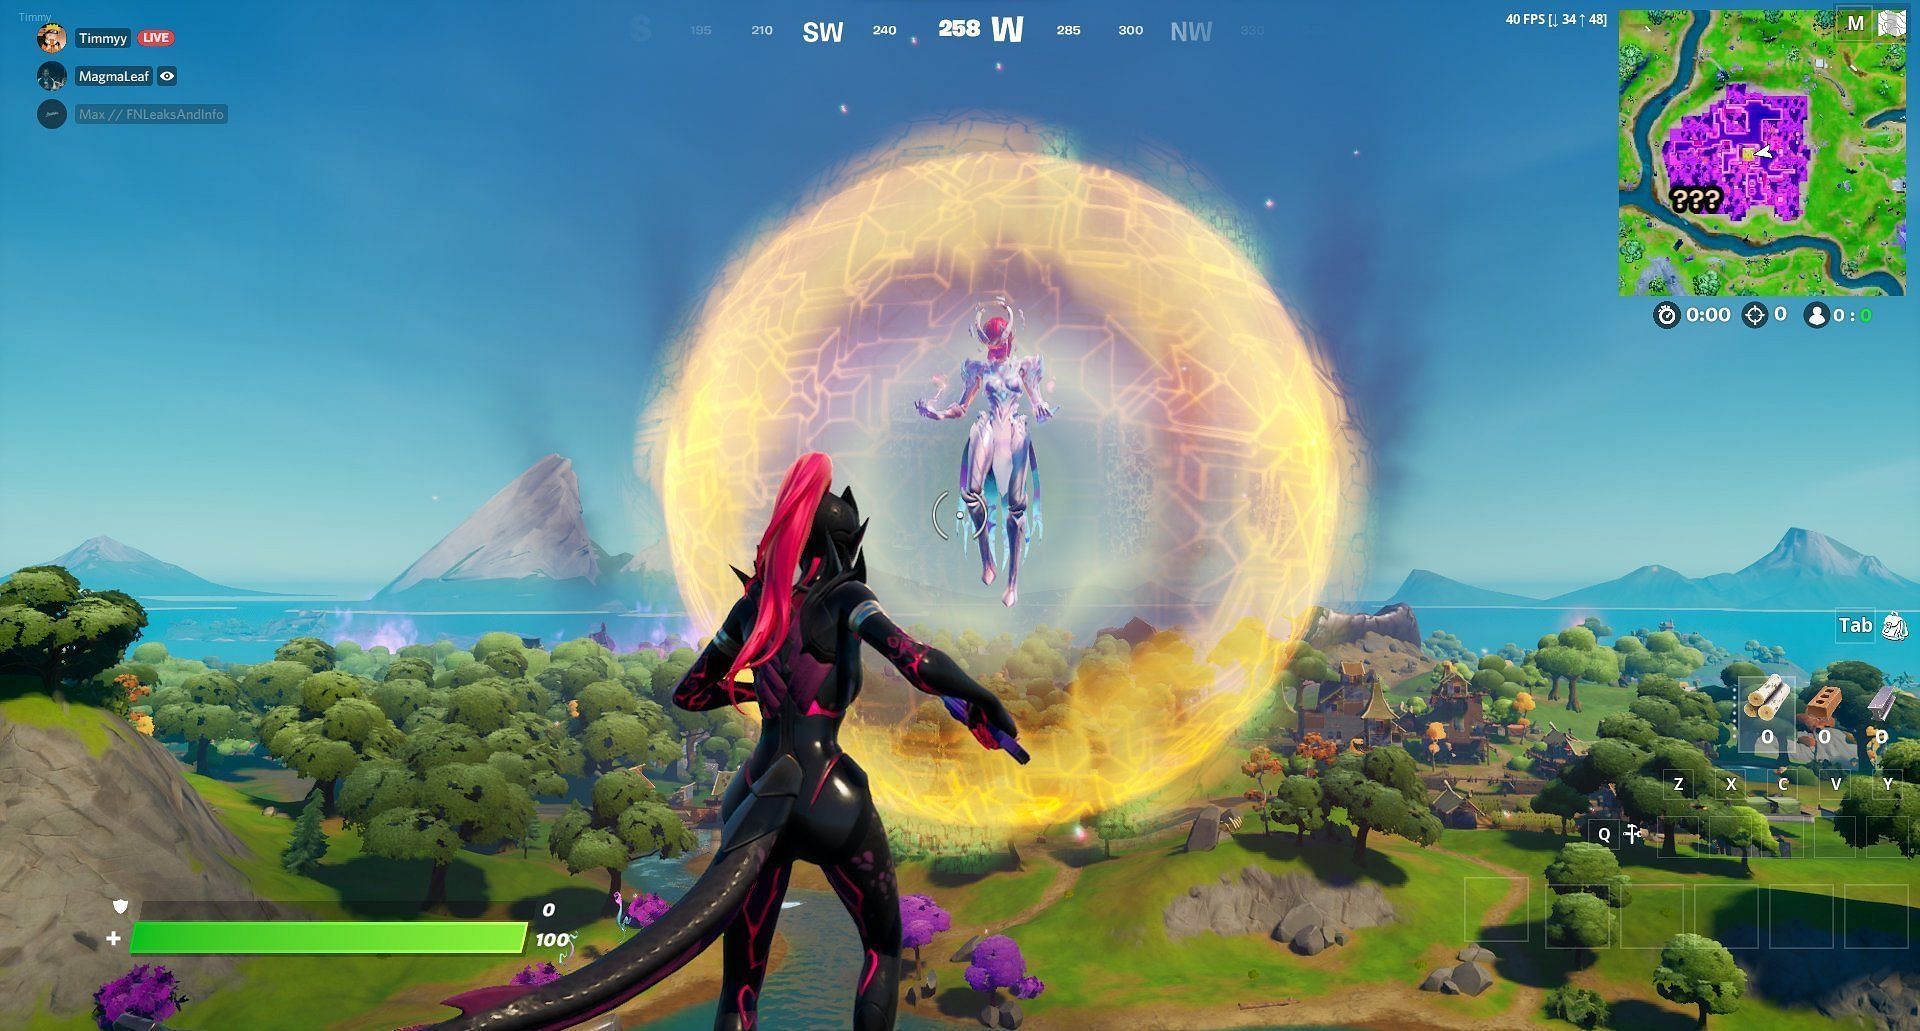 The Cube Queen stands tall above Convergence POI on the Fortnite map and has not interacted since the v18.21 update that took place yesterday (Image via Twitter / YLSDev)